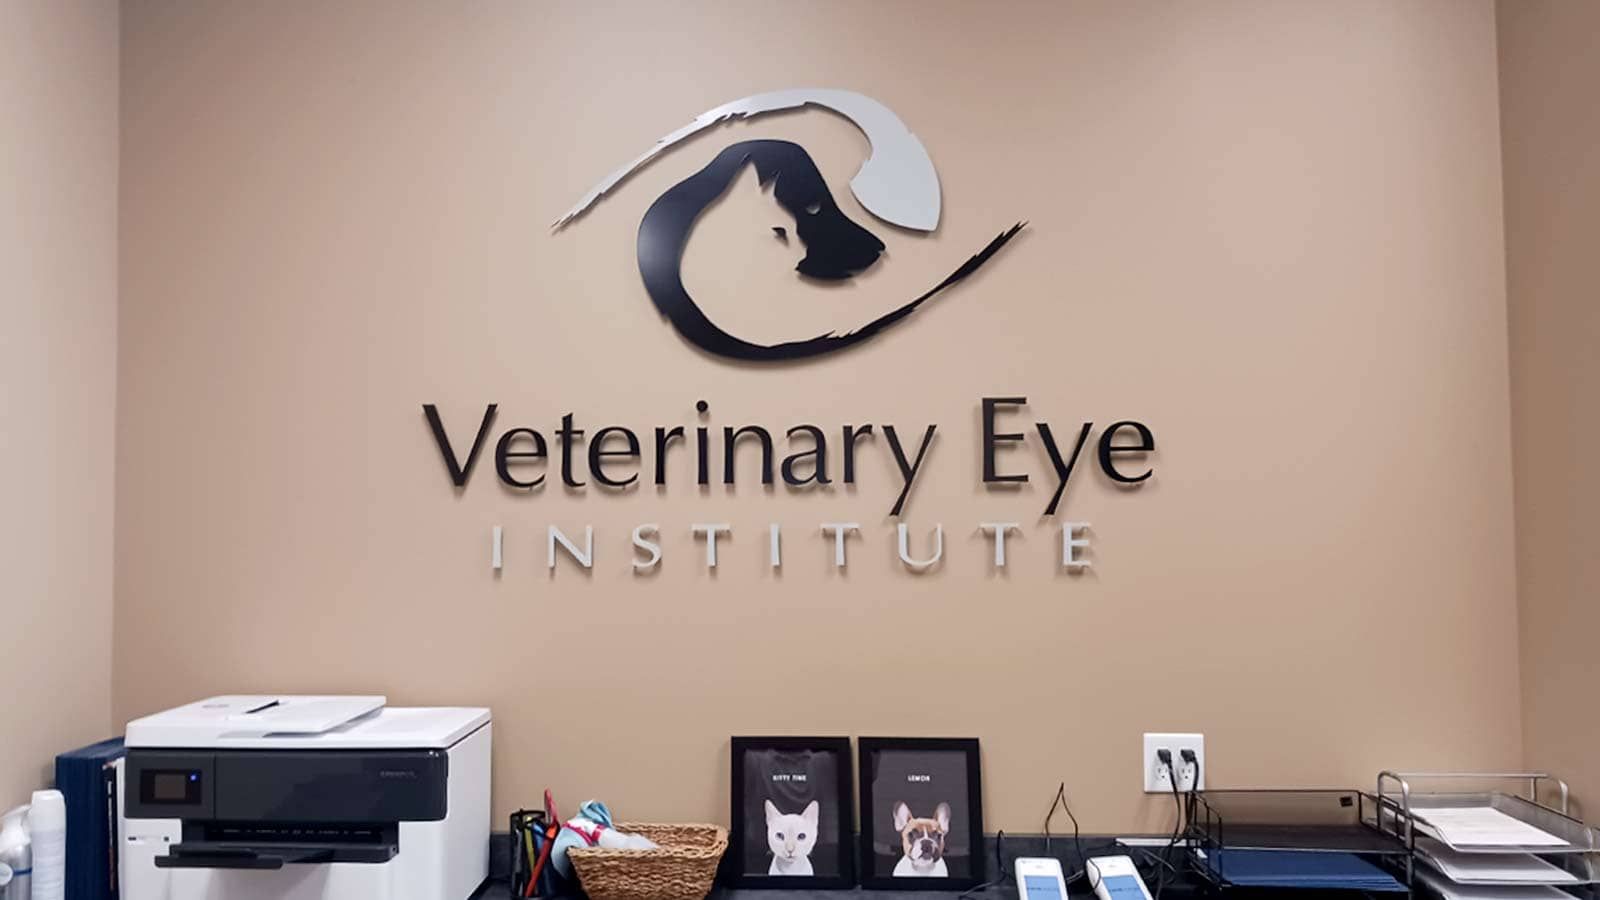 Veterinary Eye Institute medical office sign on the wall